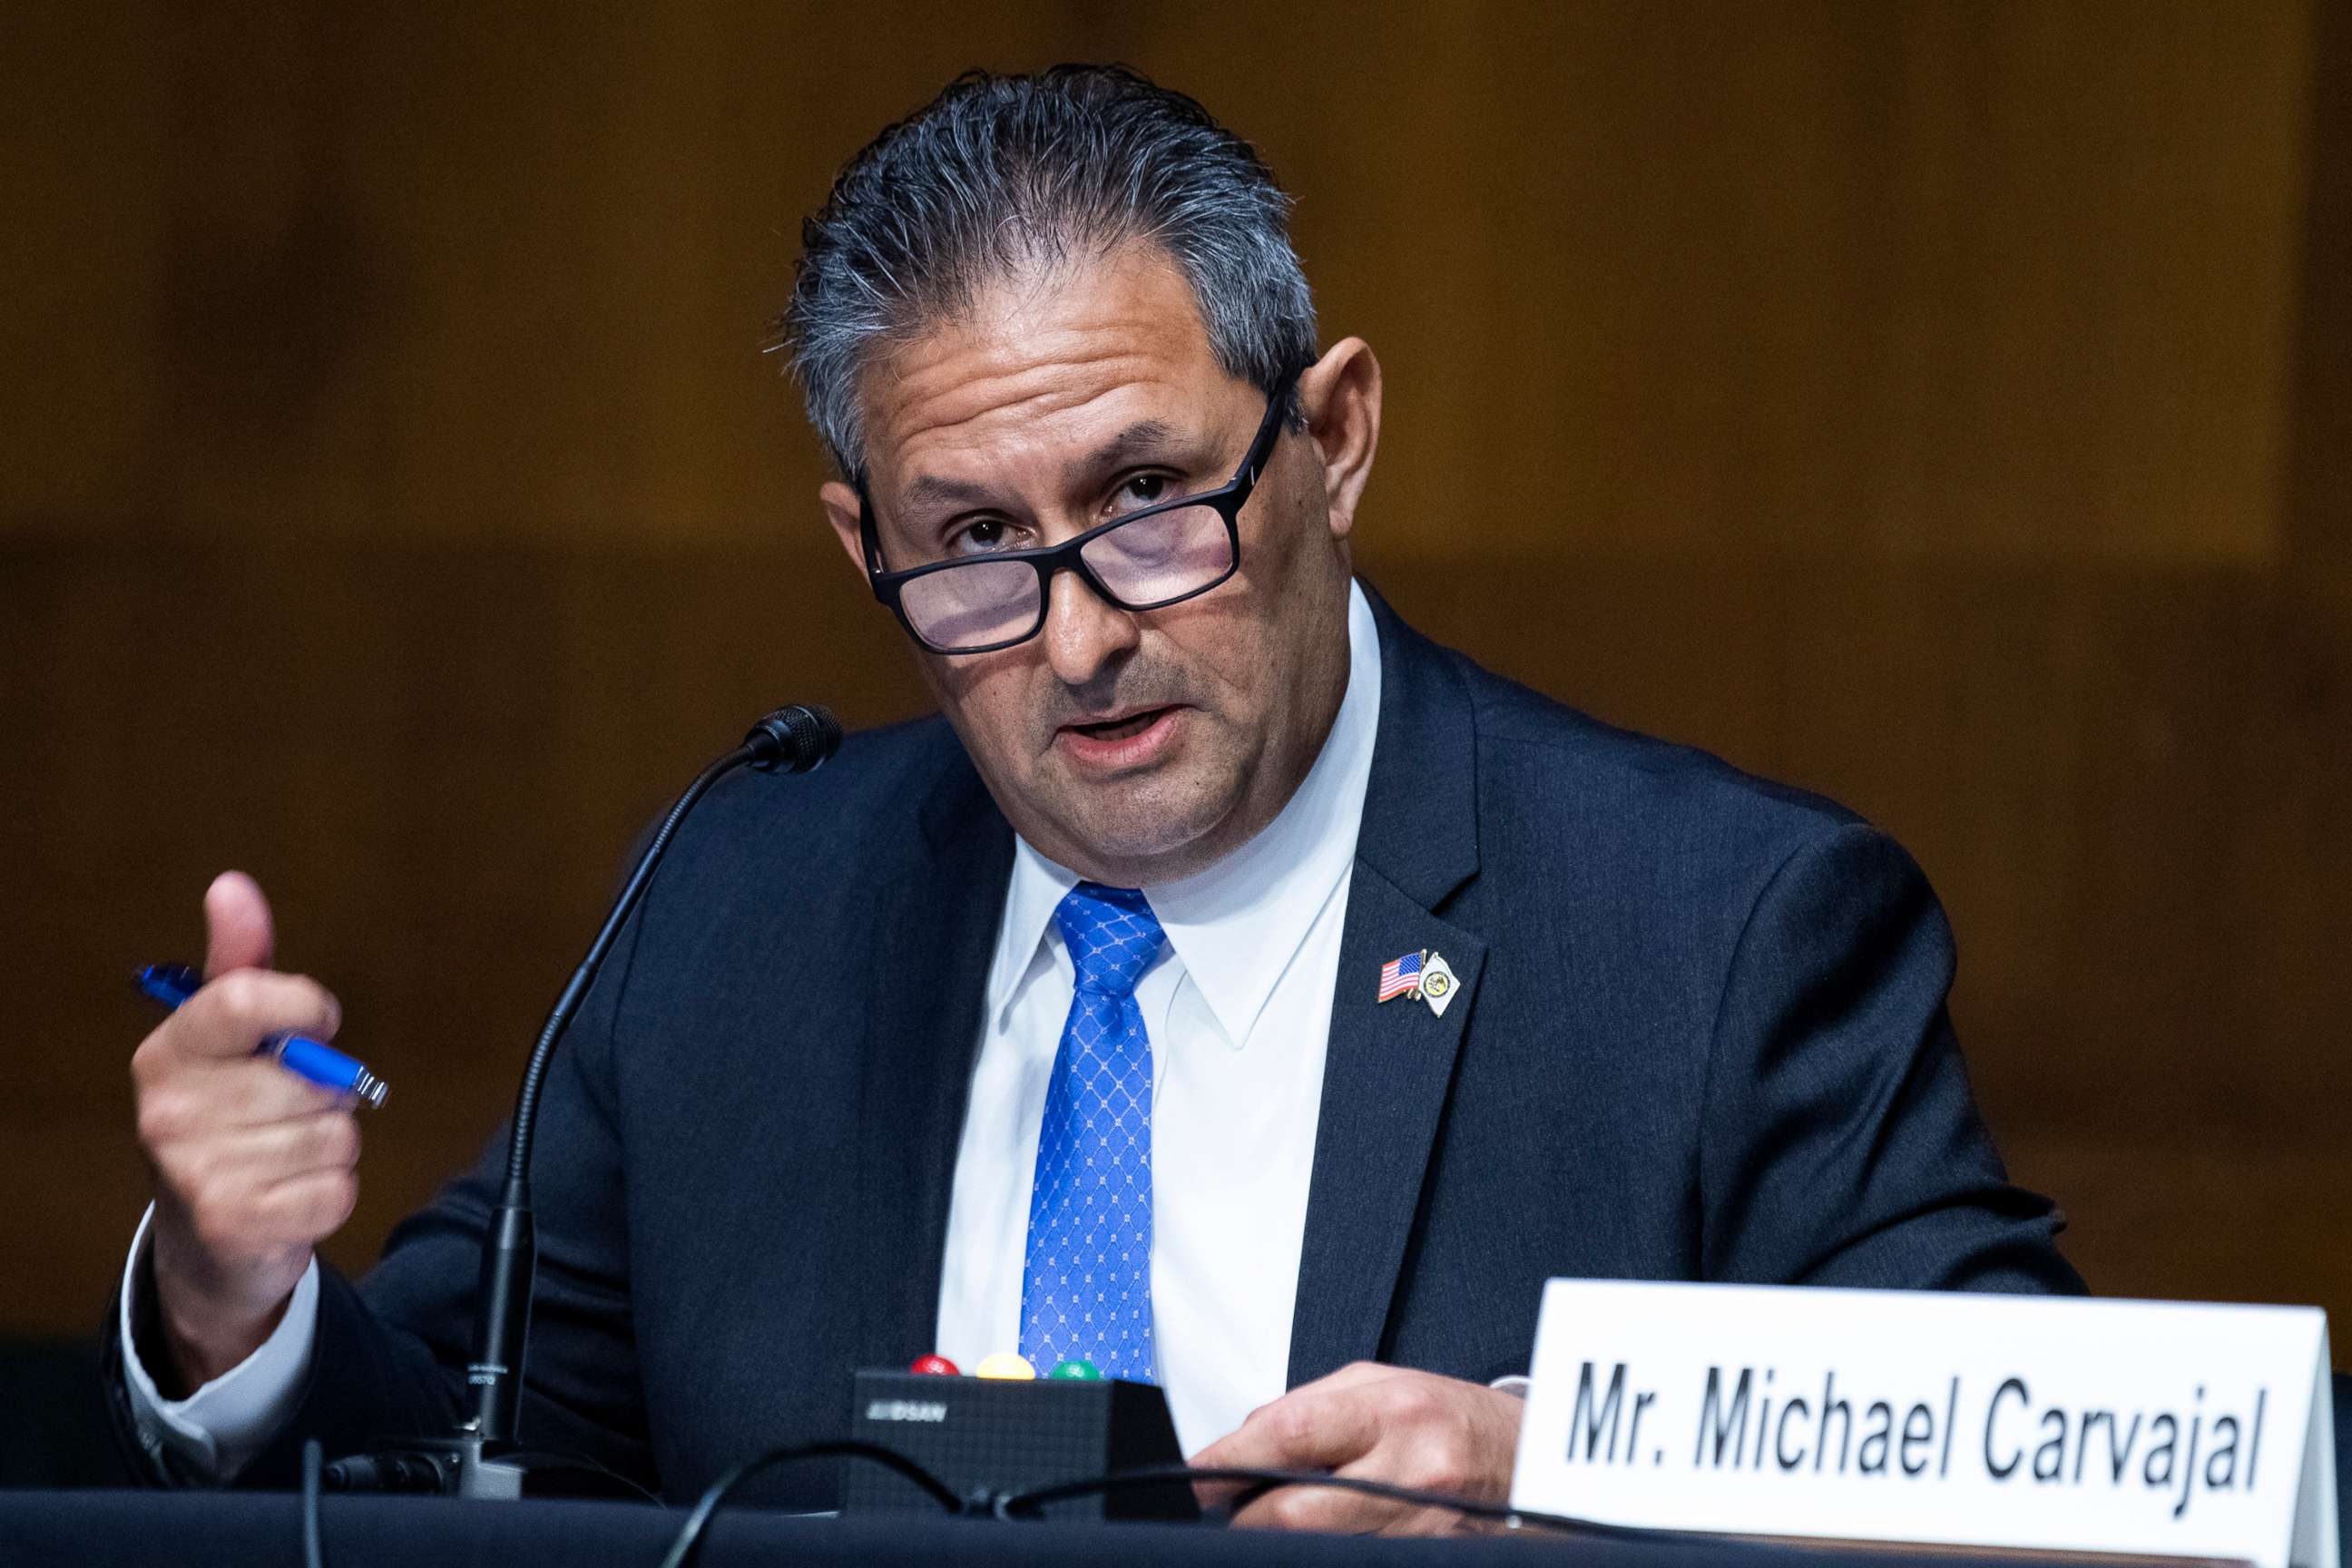 PHOTO: Michael Carvajal, director of the Federal Bureau of Prisons, testifies during a Senate Judiciary Committee hearing on Capitol Hill, June 2, 2020, in Washington, D.C.